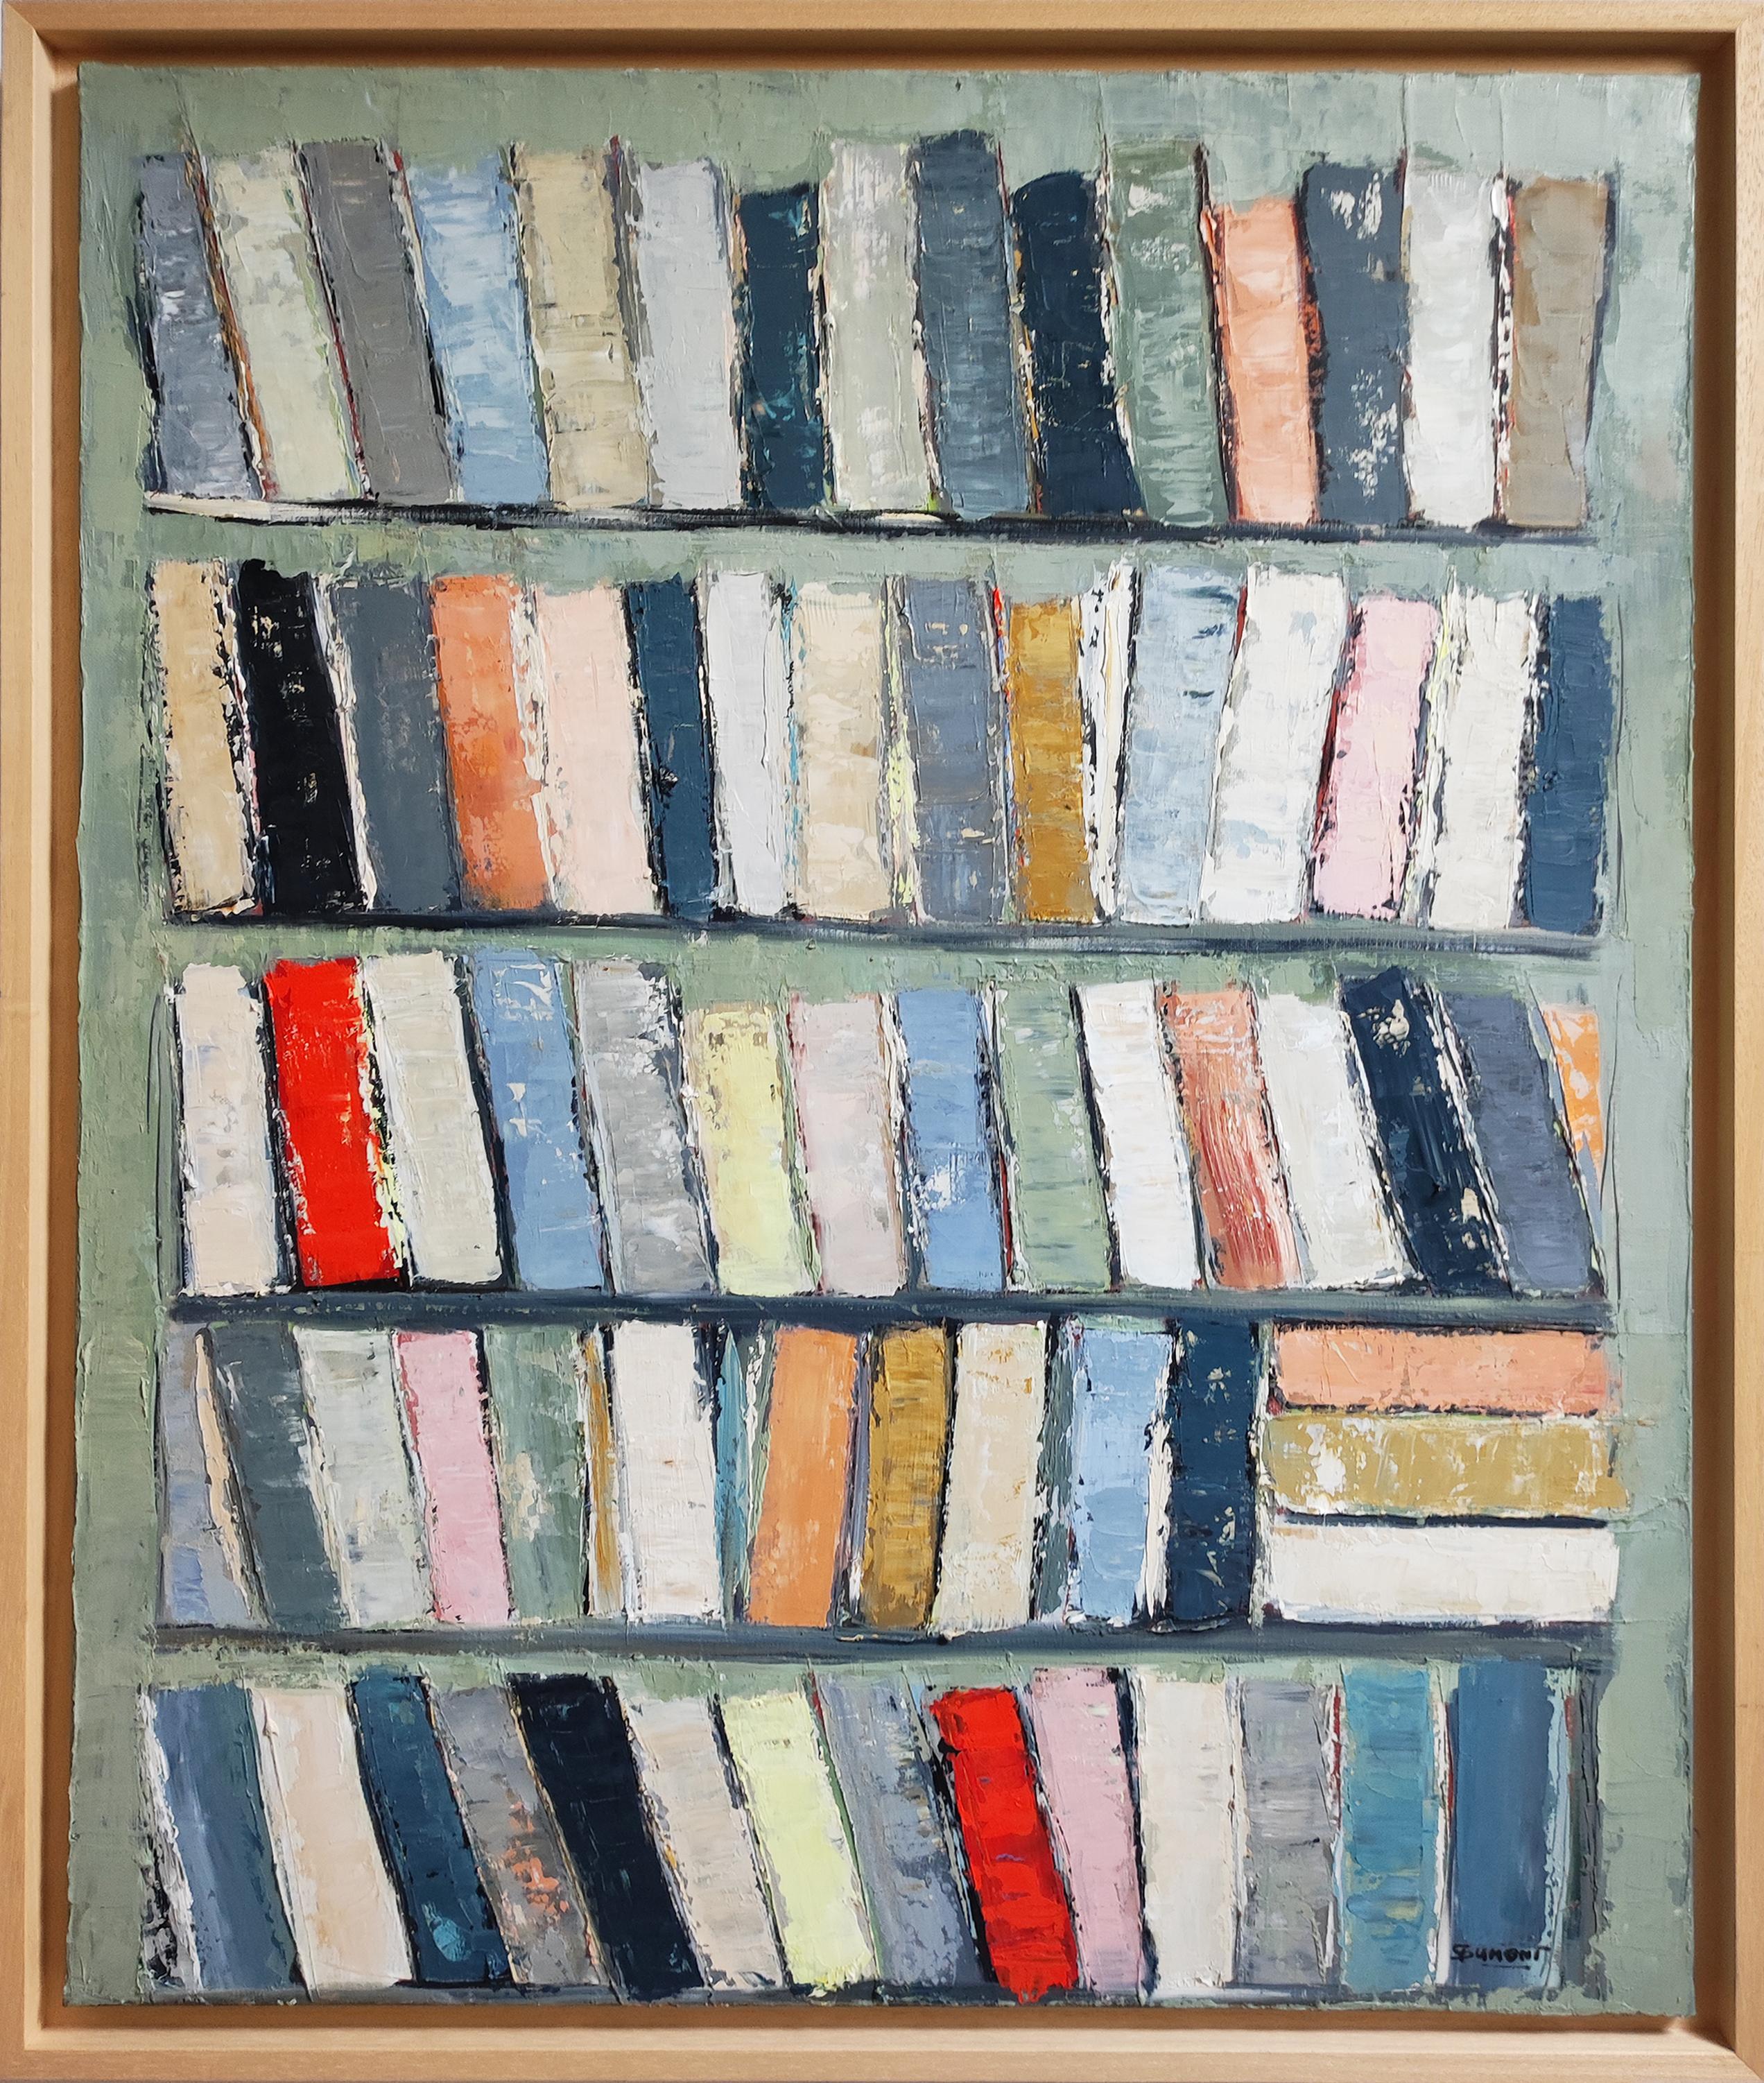 SOPHIE DUMONT Abstract Painting - Archives, colors books in library, abstract, expressionism, oil on canvas, green